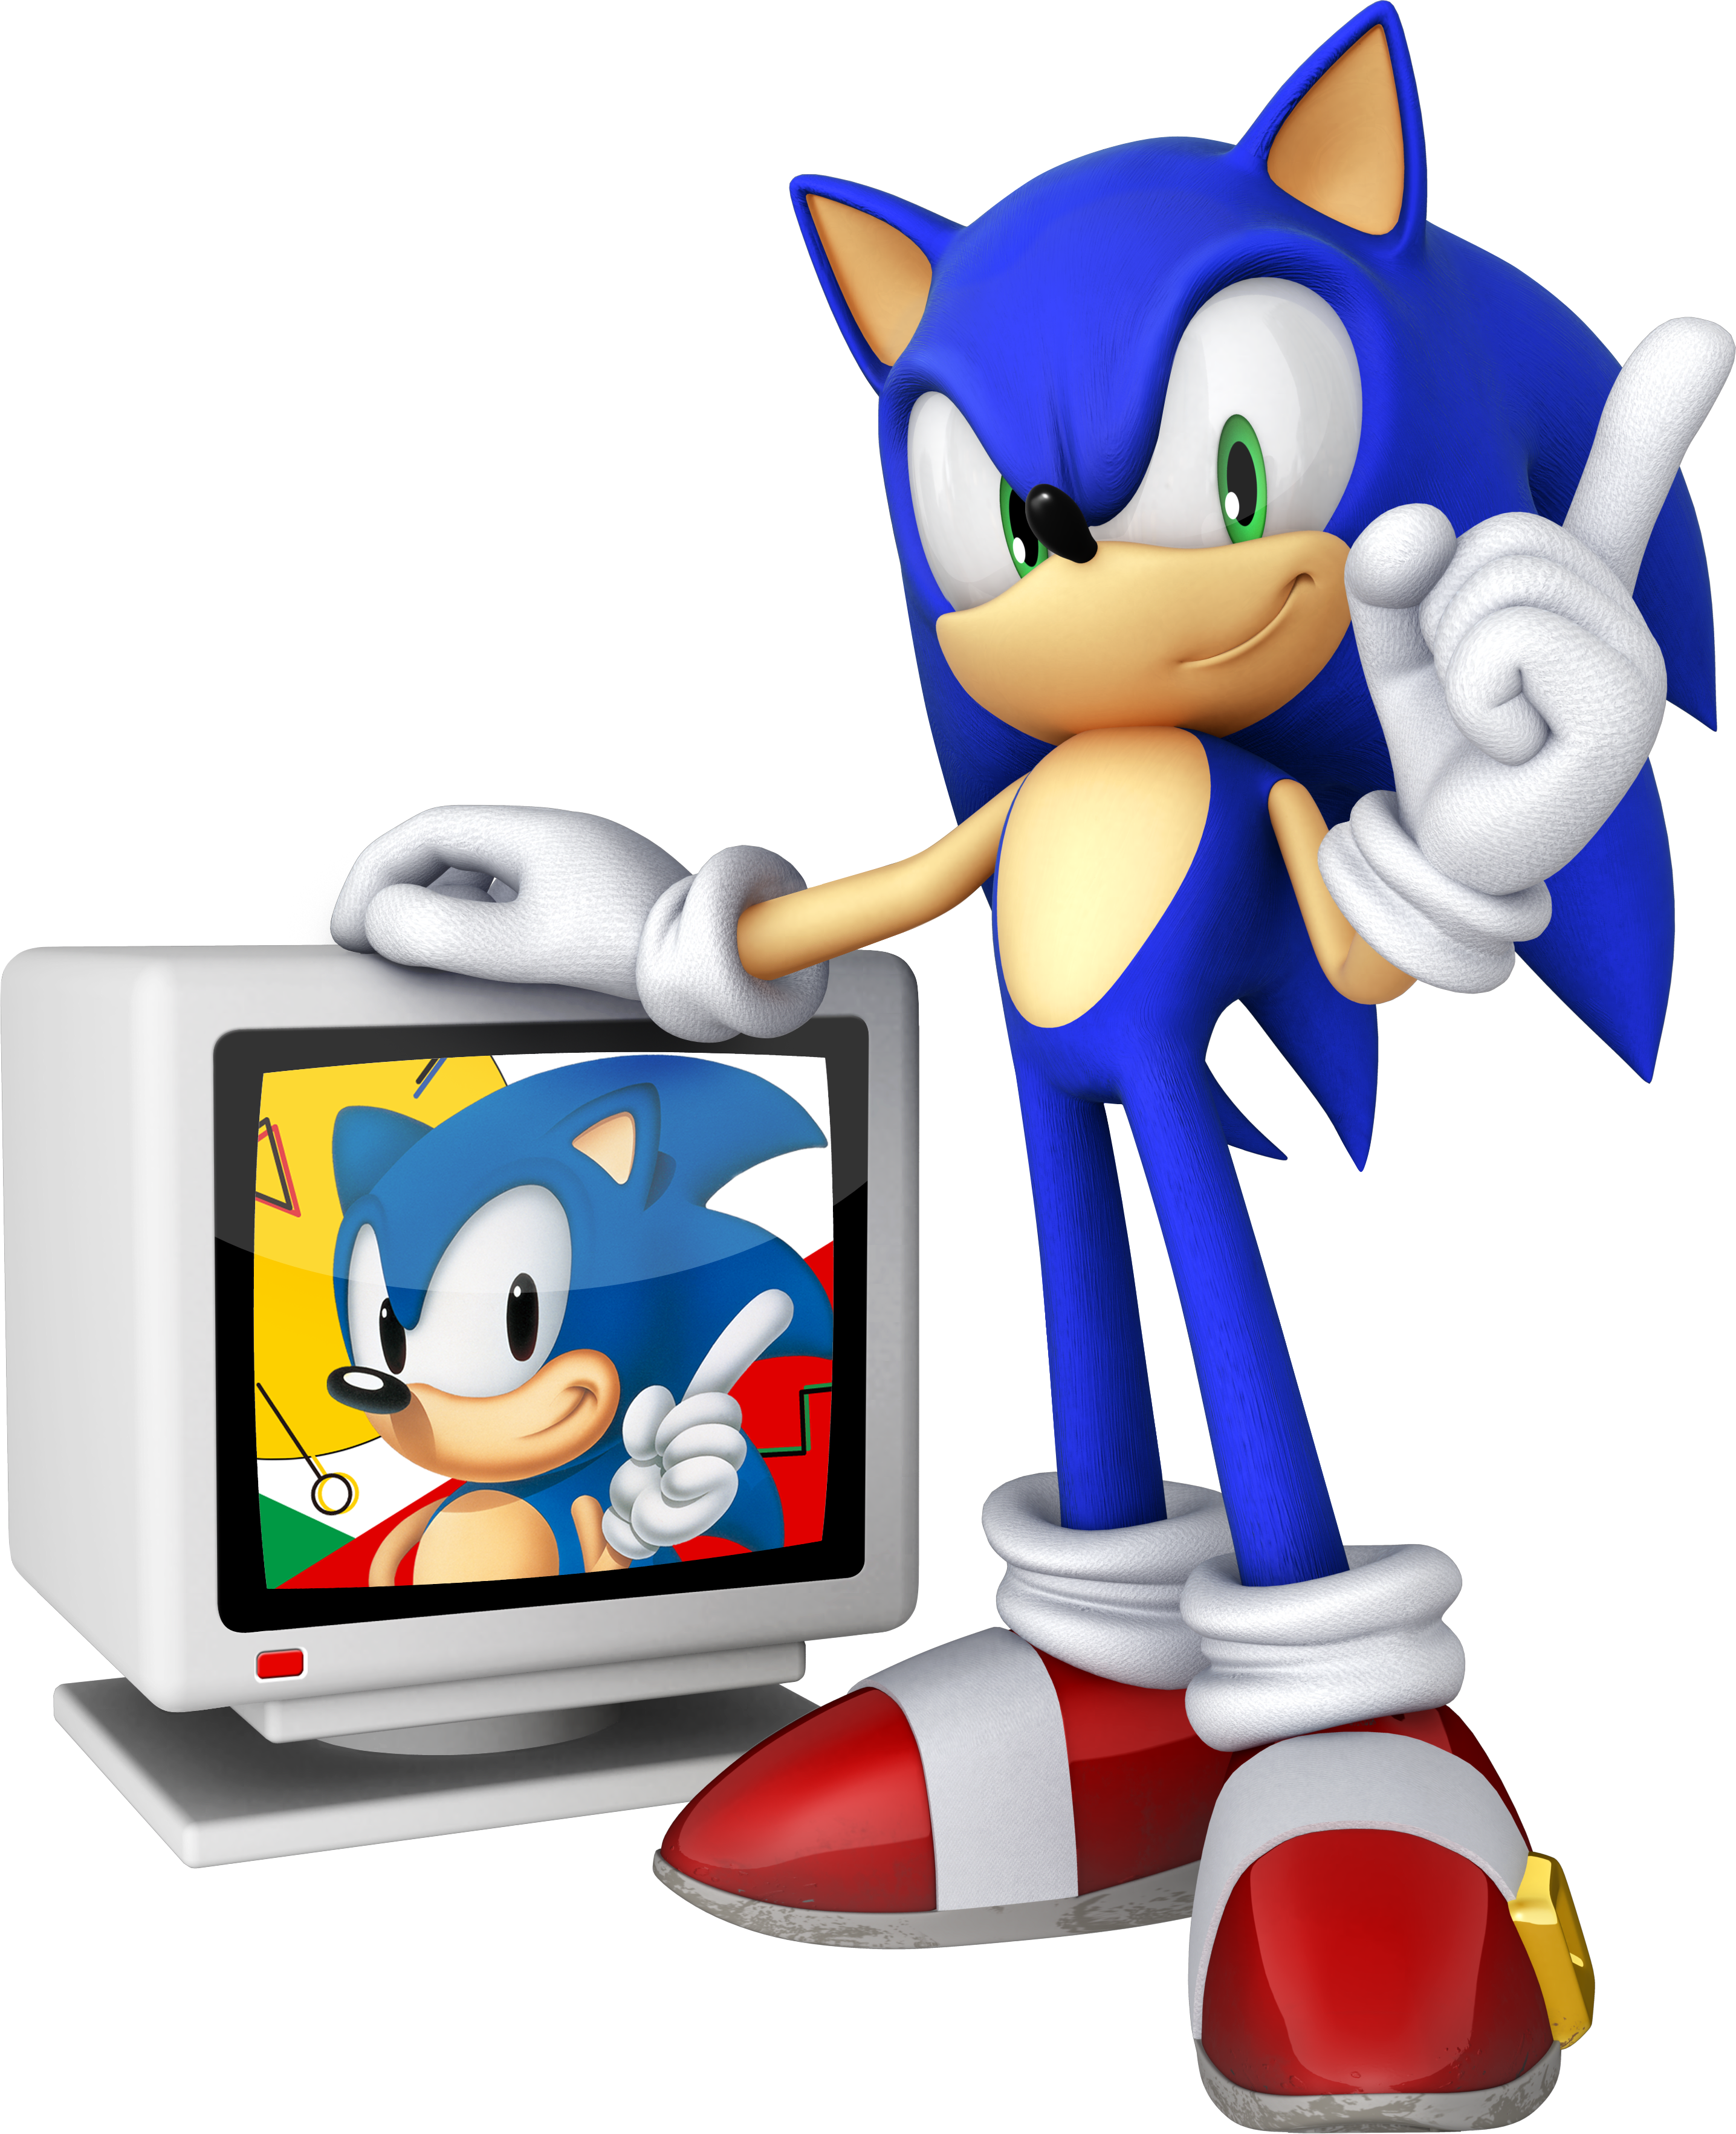 25th anniversary sonic featured image.png